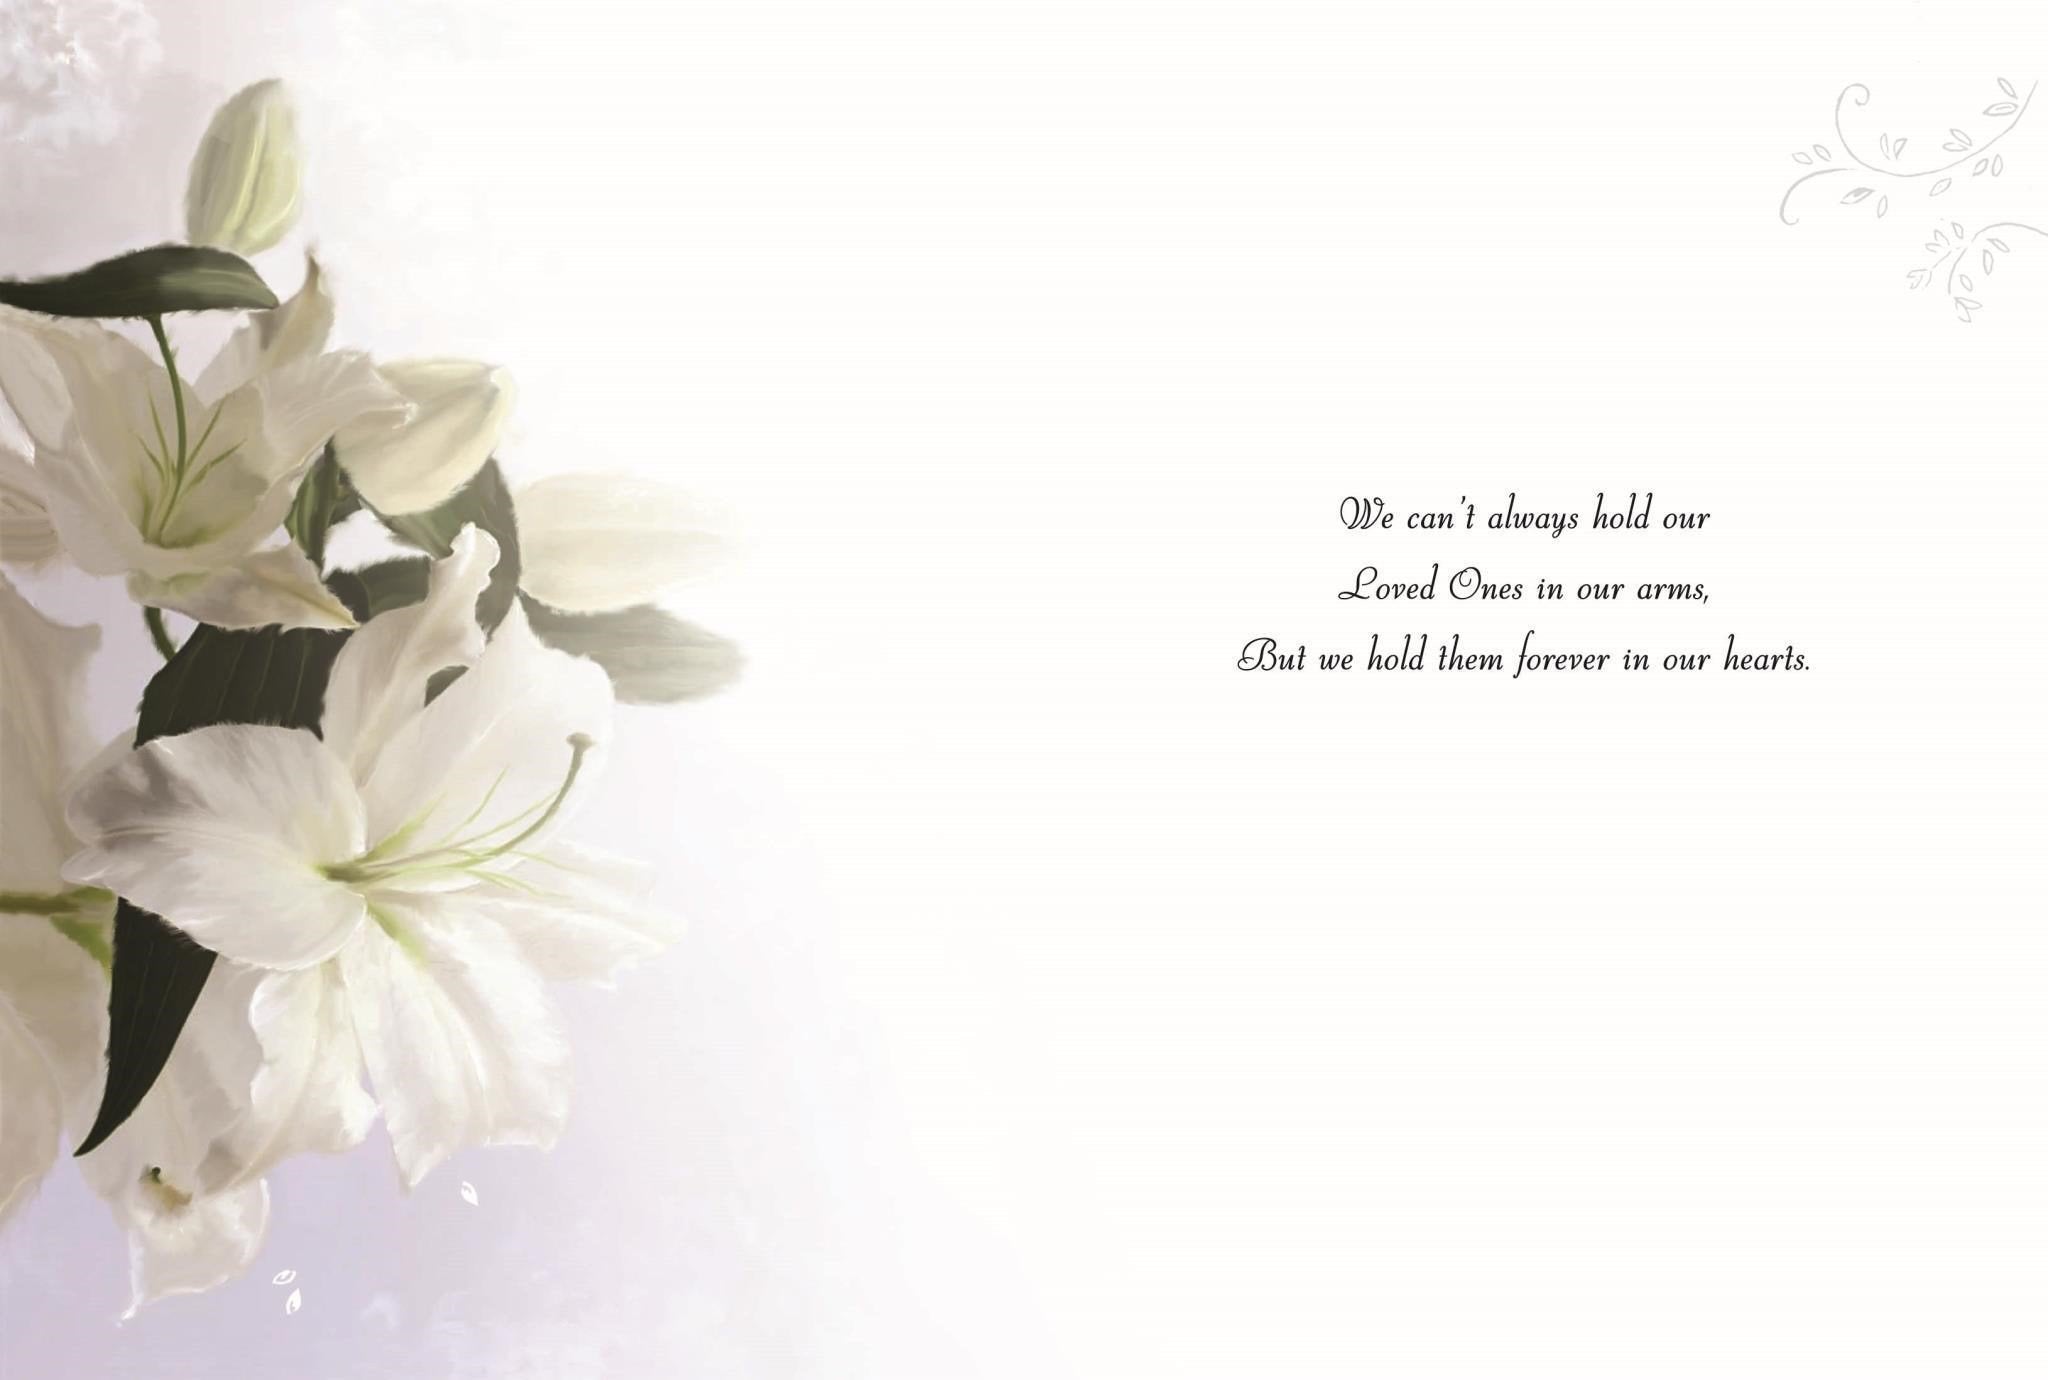 Inside of Sincere Condolences Oriental Lily Greetings Card